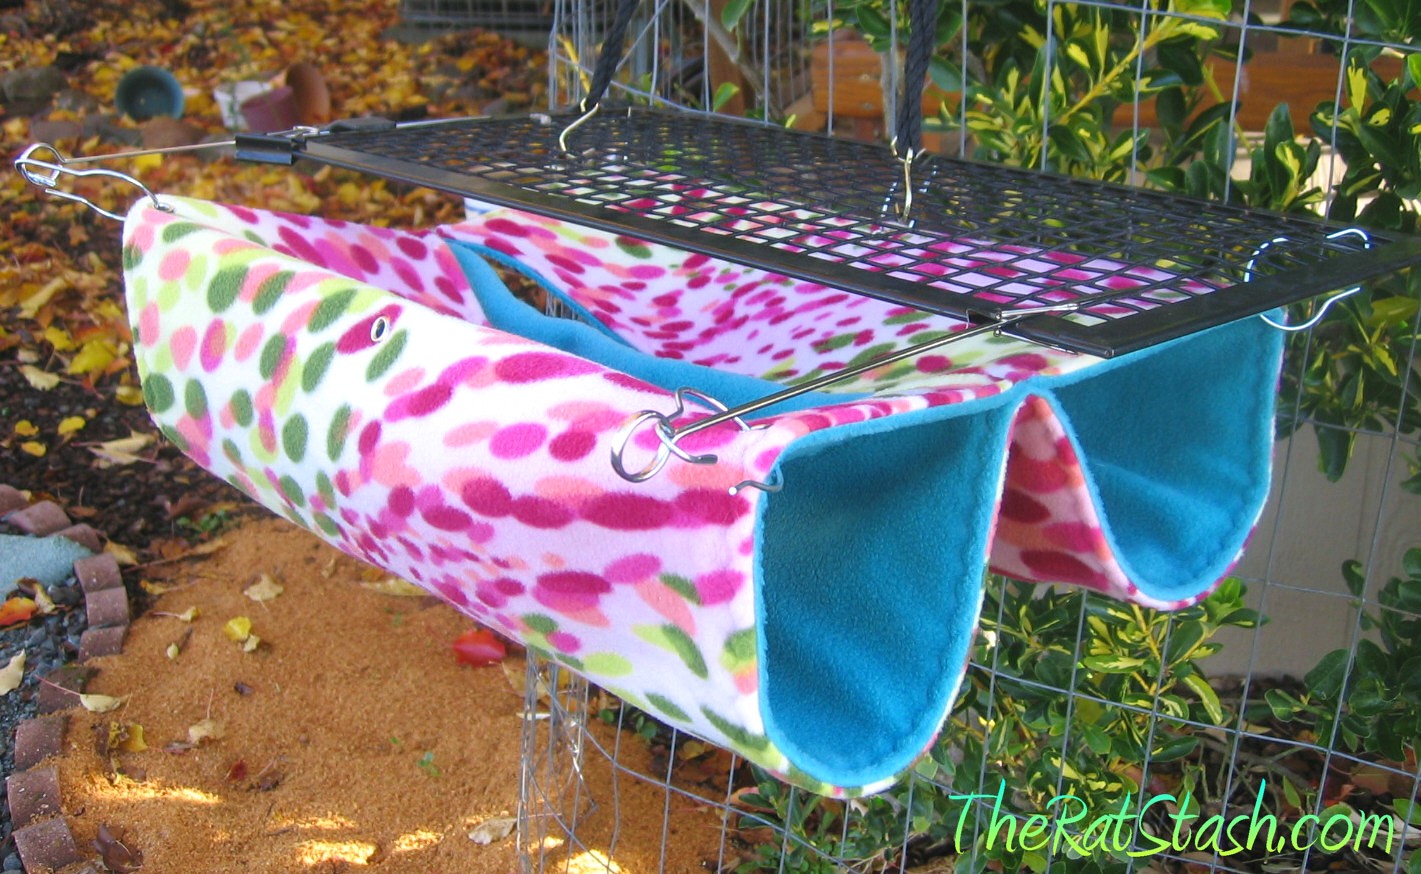 For Iliana: "All Fleece" Ferret Lazy Lounger in surprise fabric